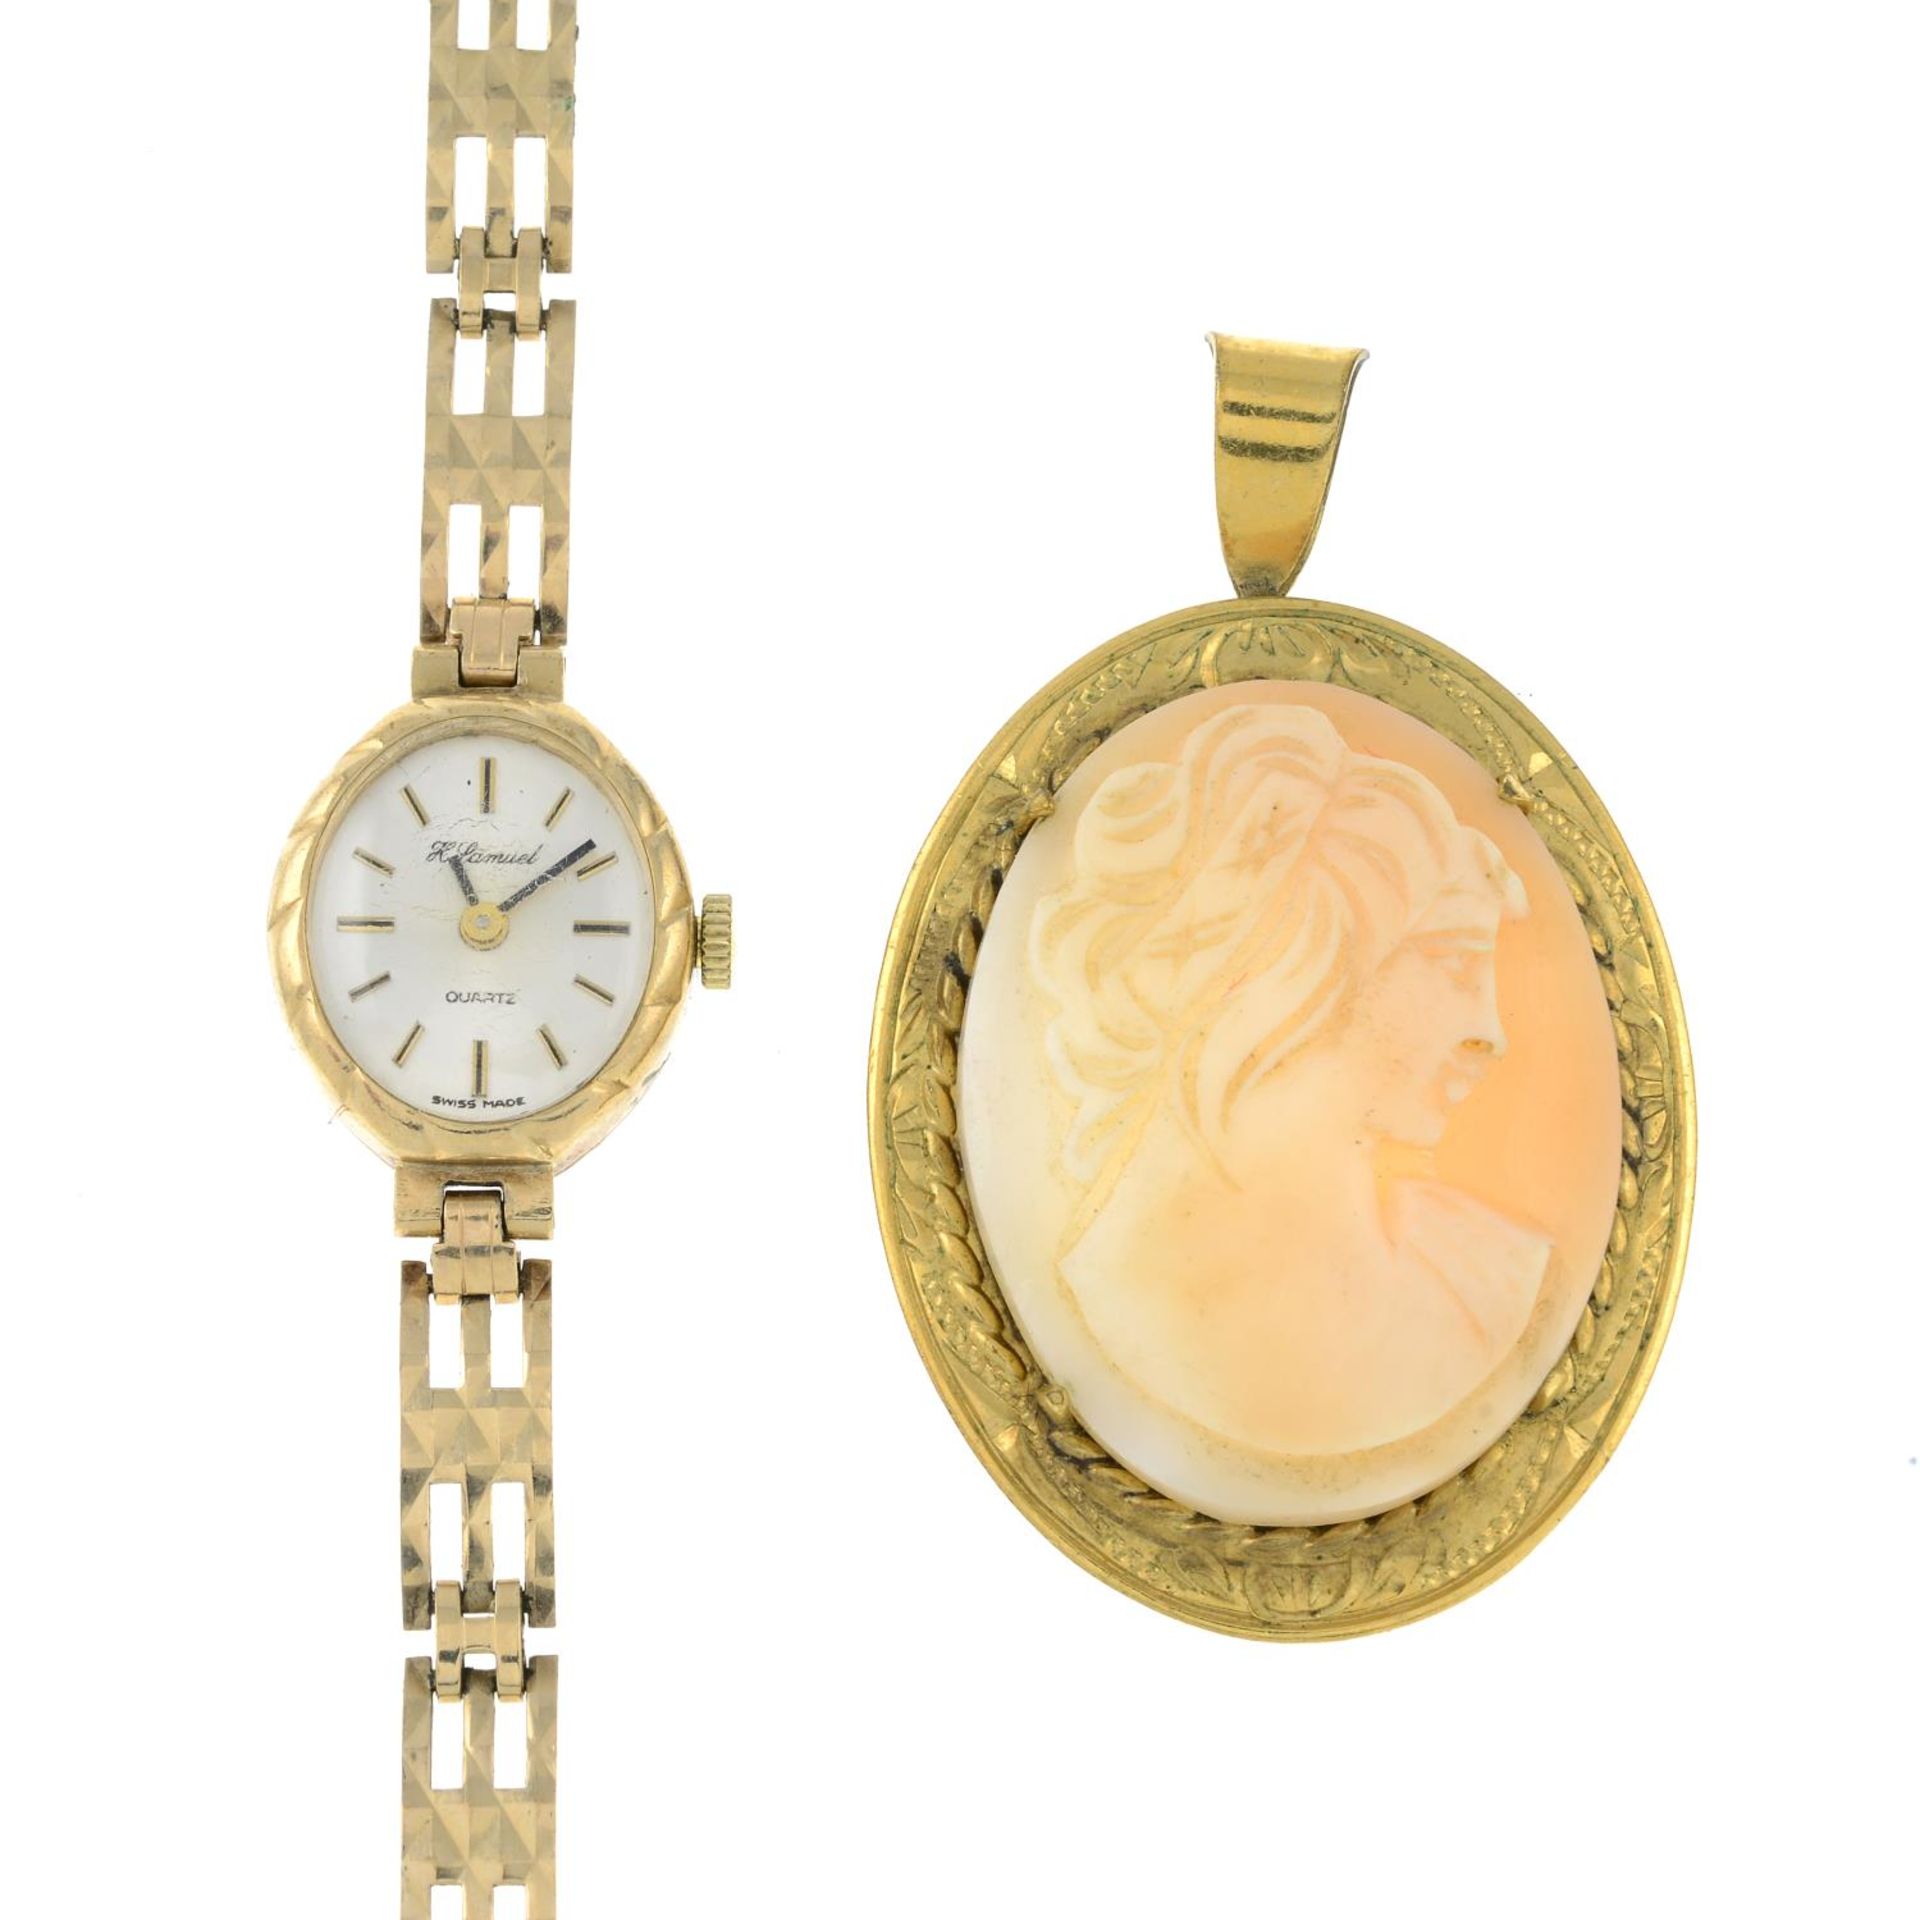 A lady's 9ct gold wrist watch, hallmarks for 9ct gold, length 17.5cms, total weight 10.1gms.